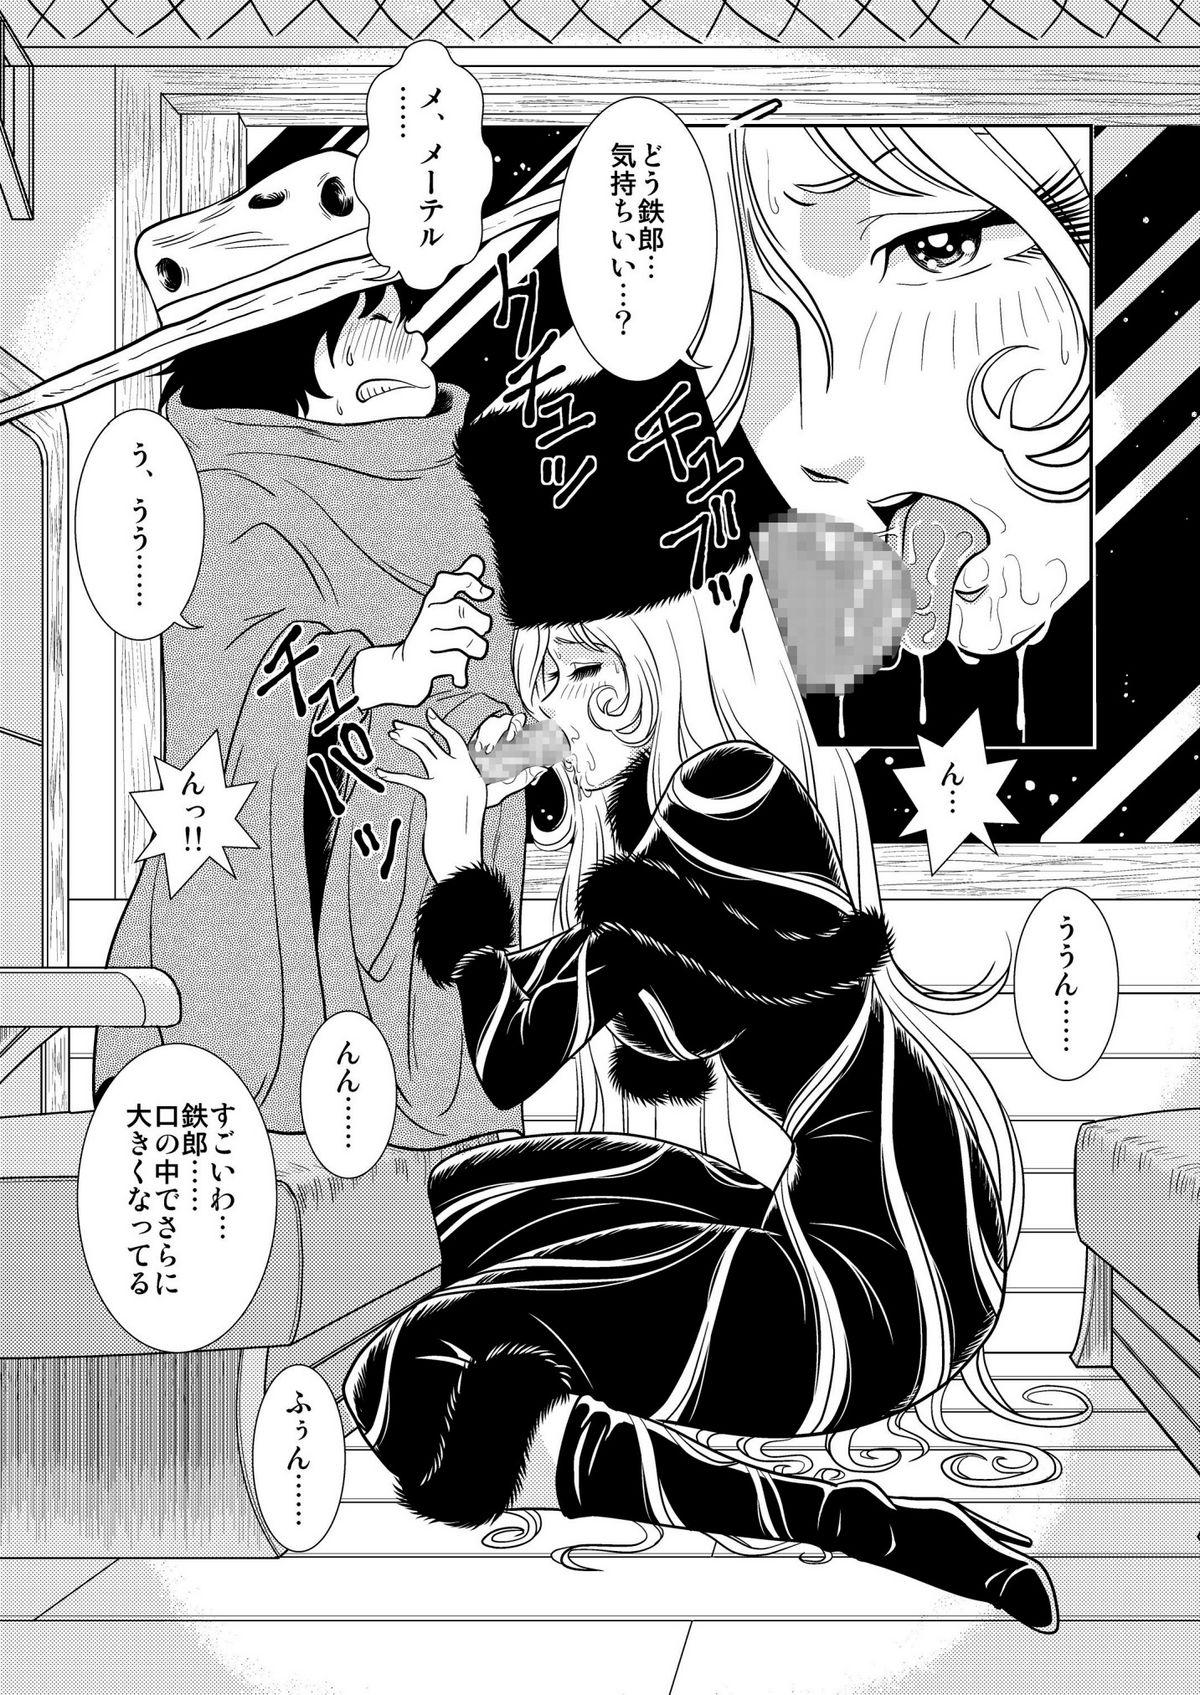 Gapes Gaping Asshole Maetel Story 2 - Galaxy express 999 Toes - Page 9